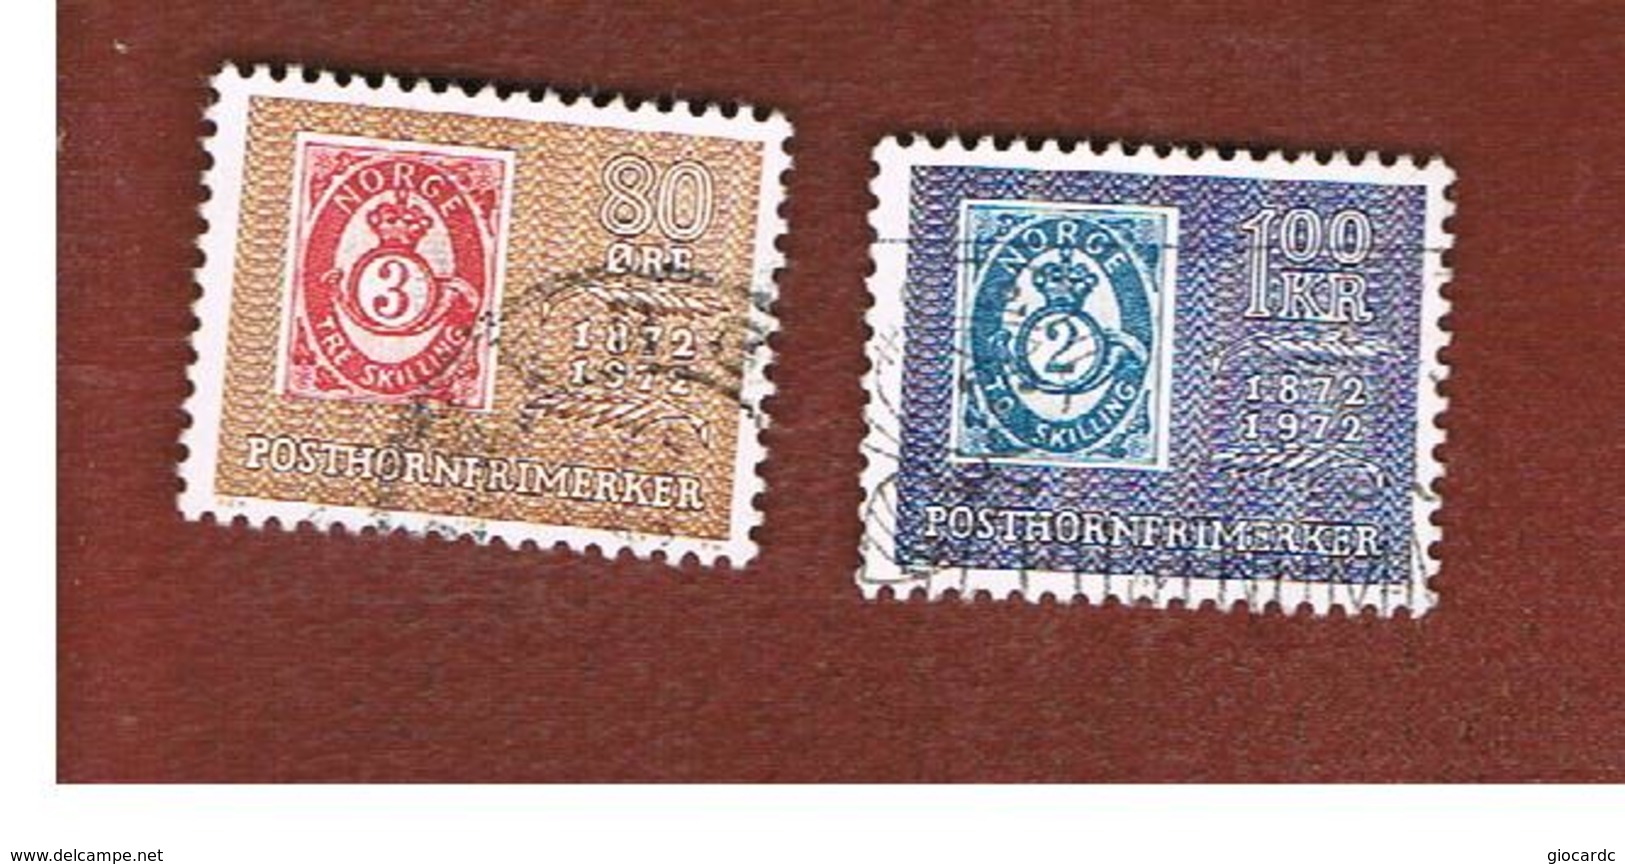 NORVEGIA  (NORWAY)    SG 677.678  -   1972 CENTENARY OF  NORWEGIAN POSTHORN STAMP (COMPLET SET OF 2) -   USED ° - Usati